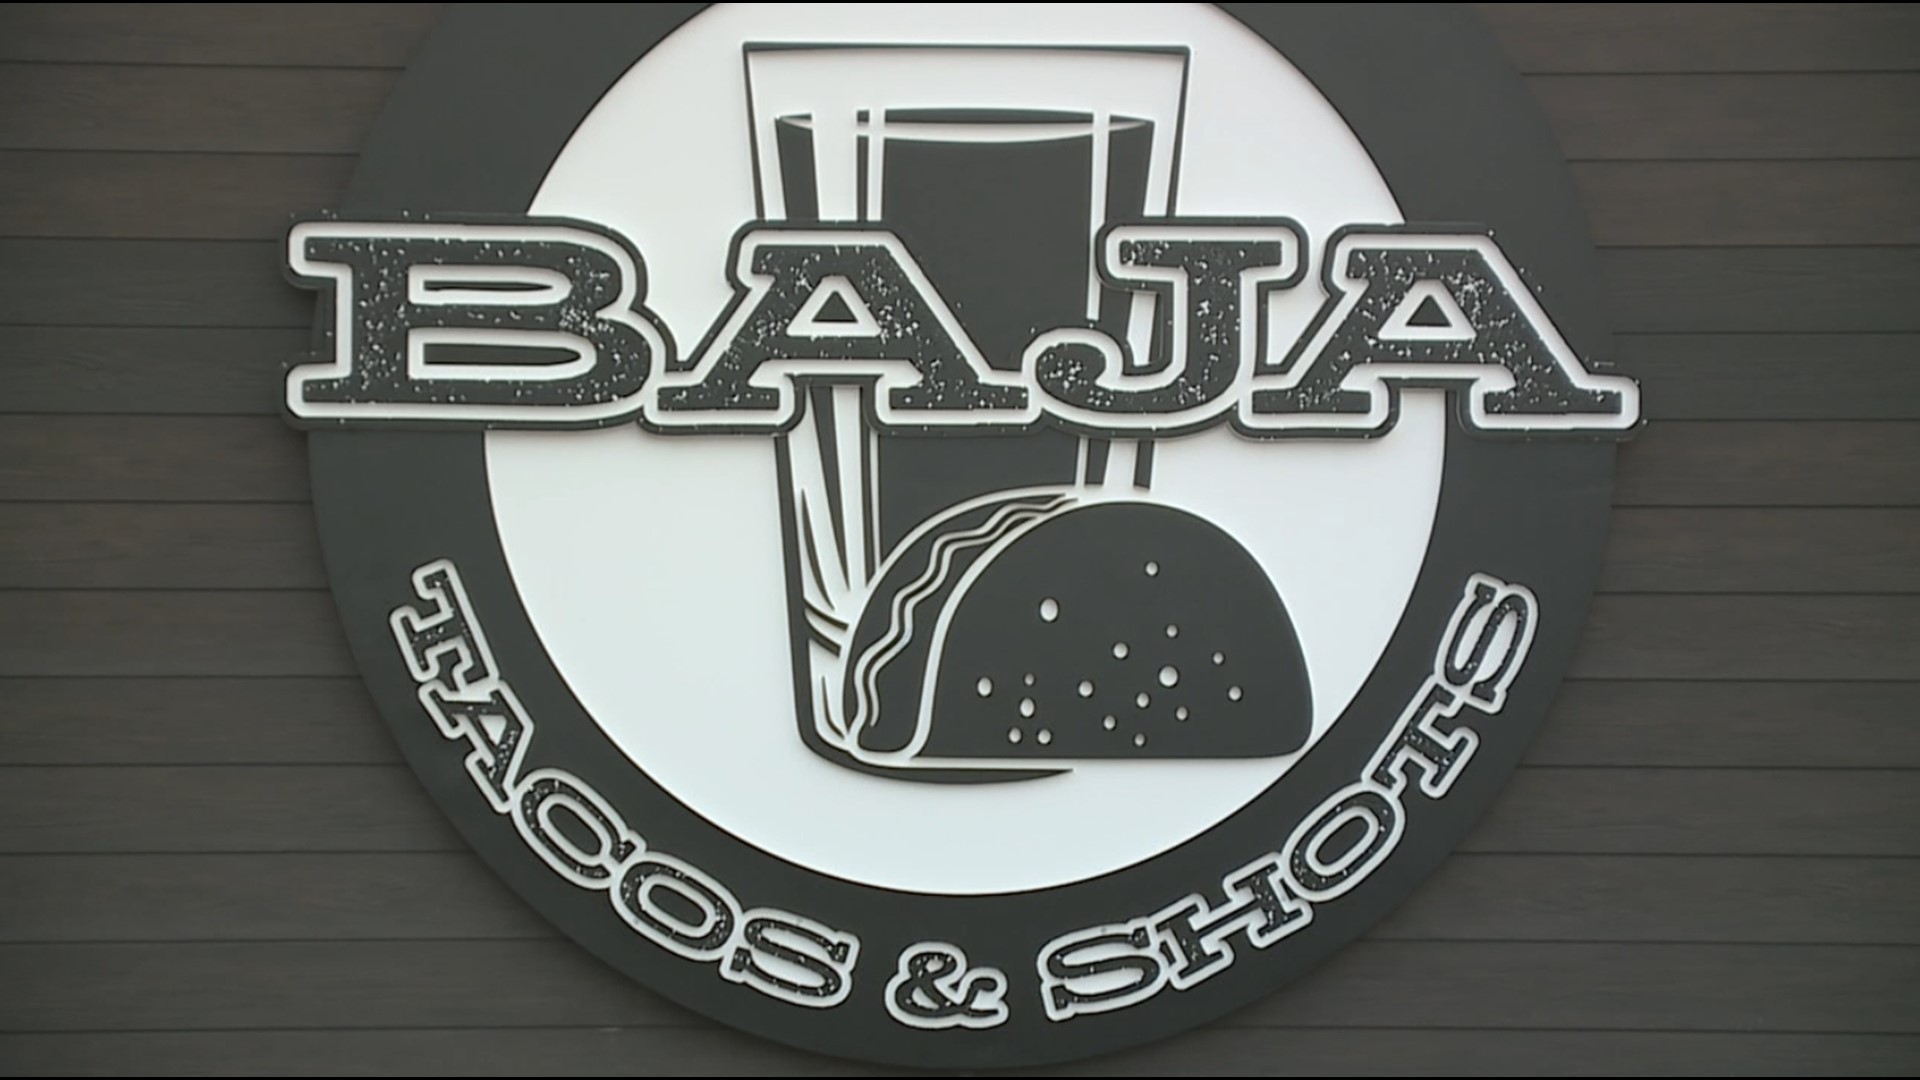 Can you guess the two things Baja Tacos & Shots is featuring on its menu?